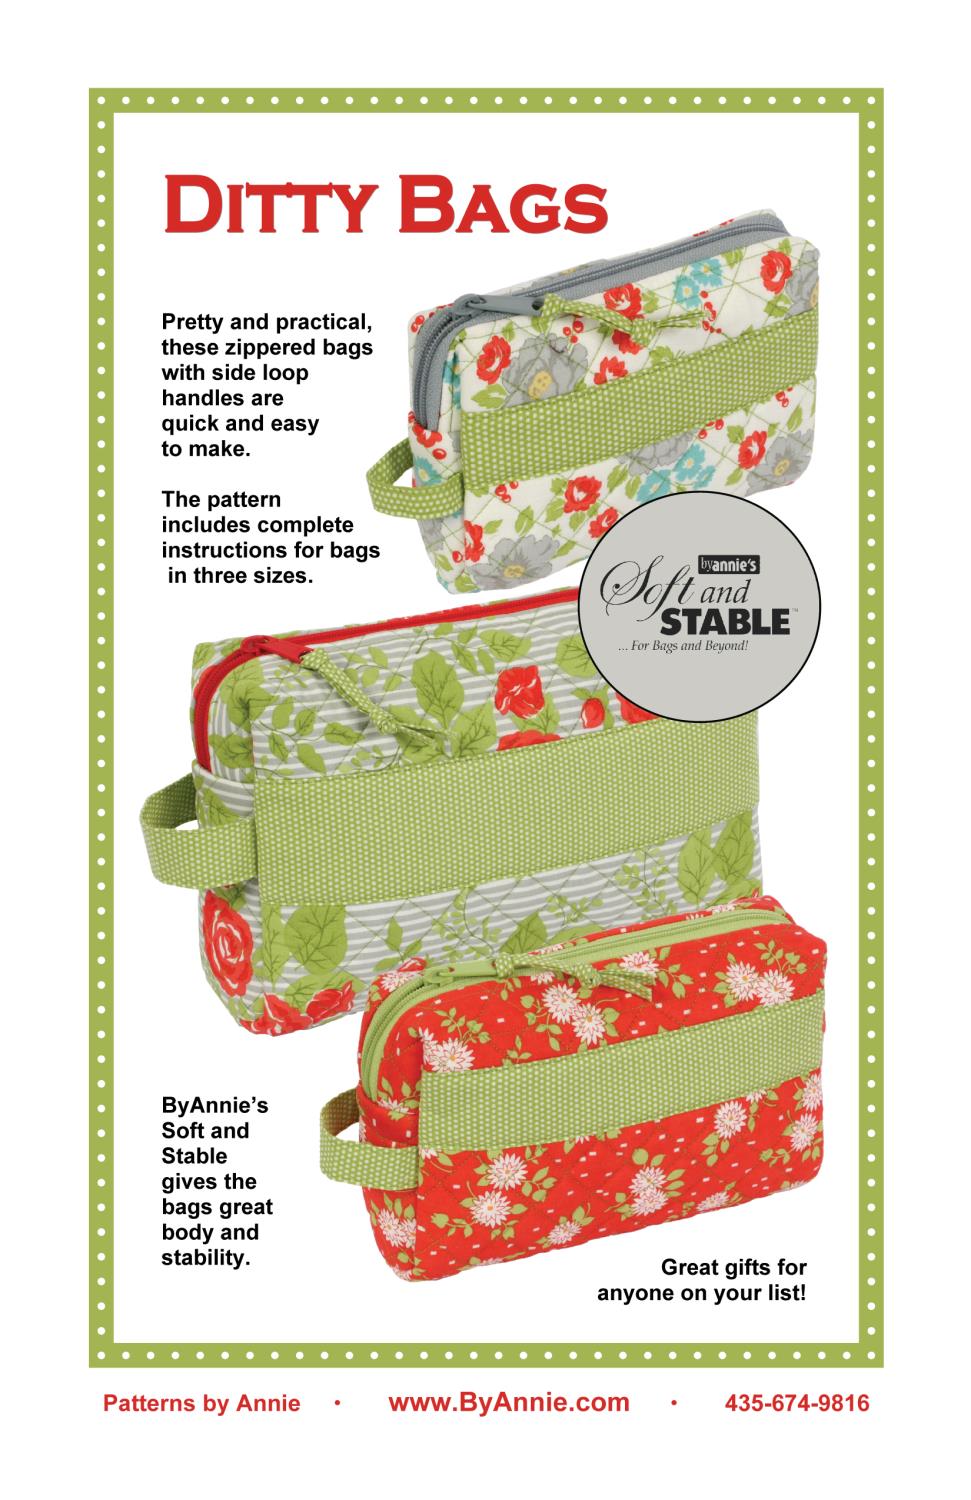 Ditty Bags – Patterns by Annie